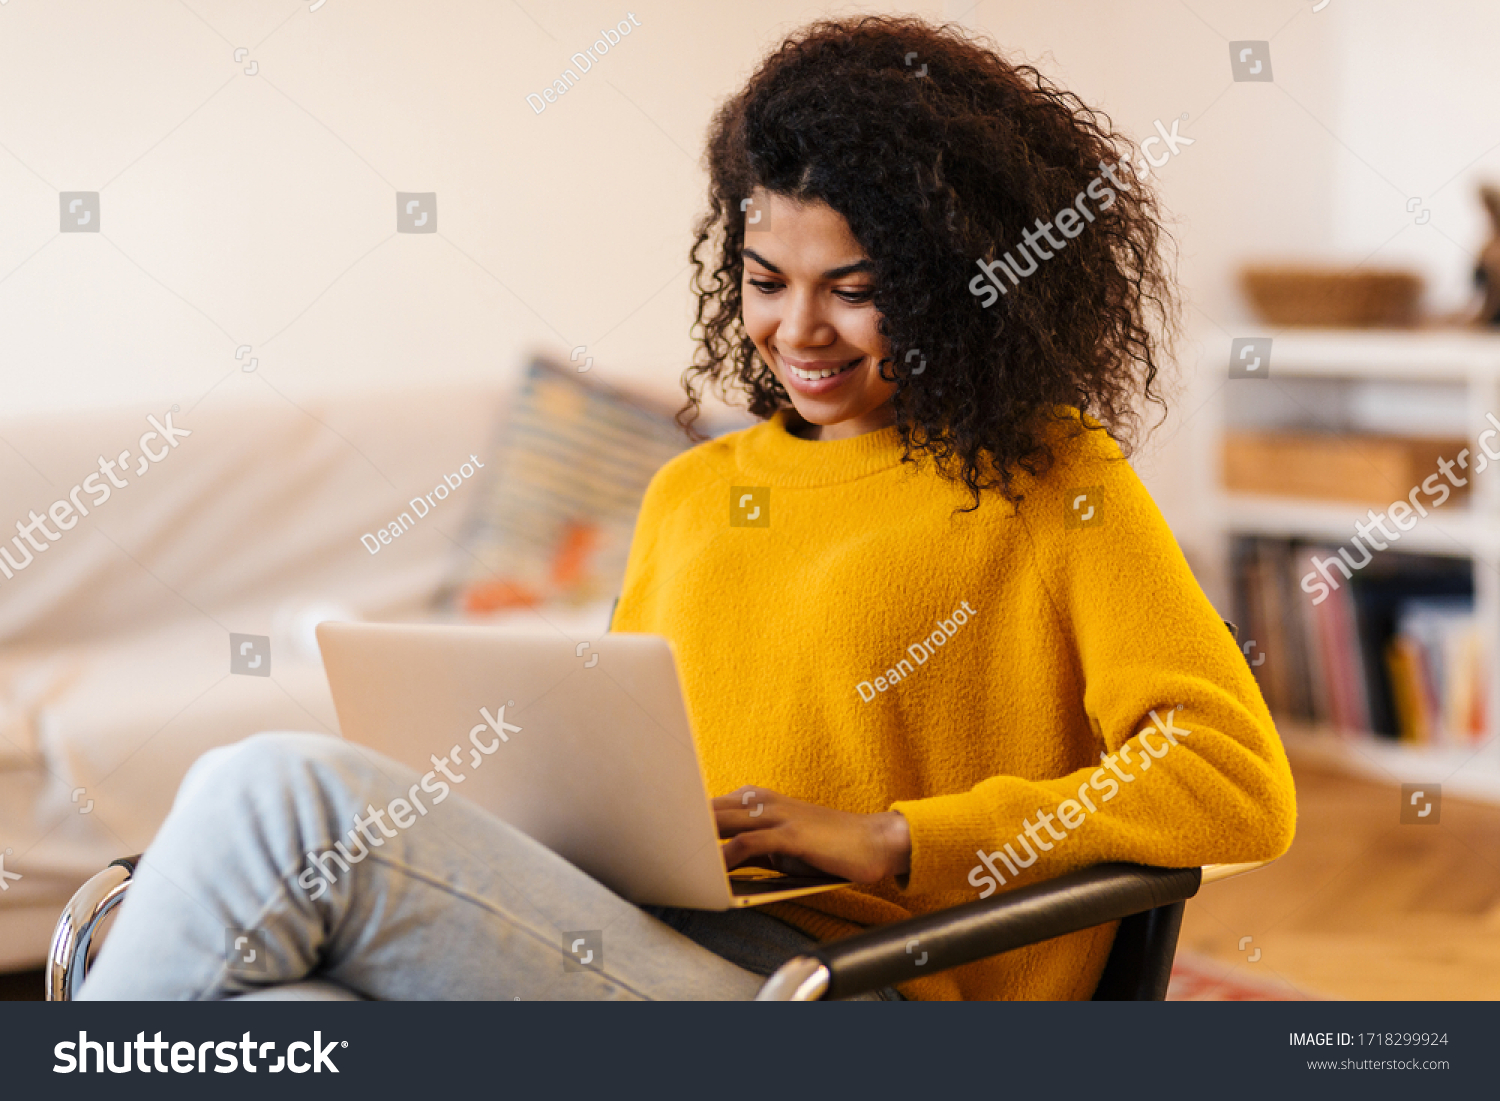 Image of cheerful african american woman using laptop while sitting on chair in living room #1718299924